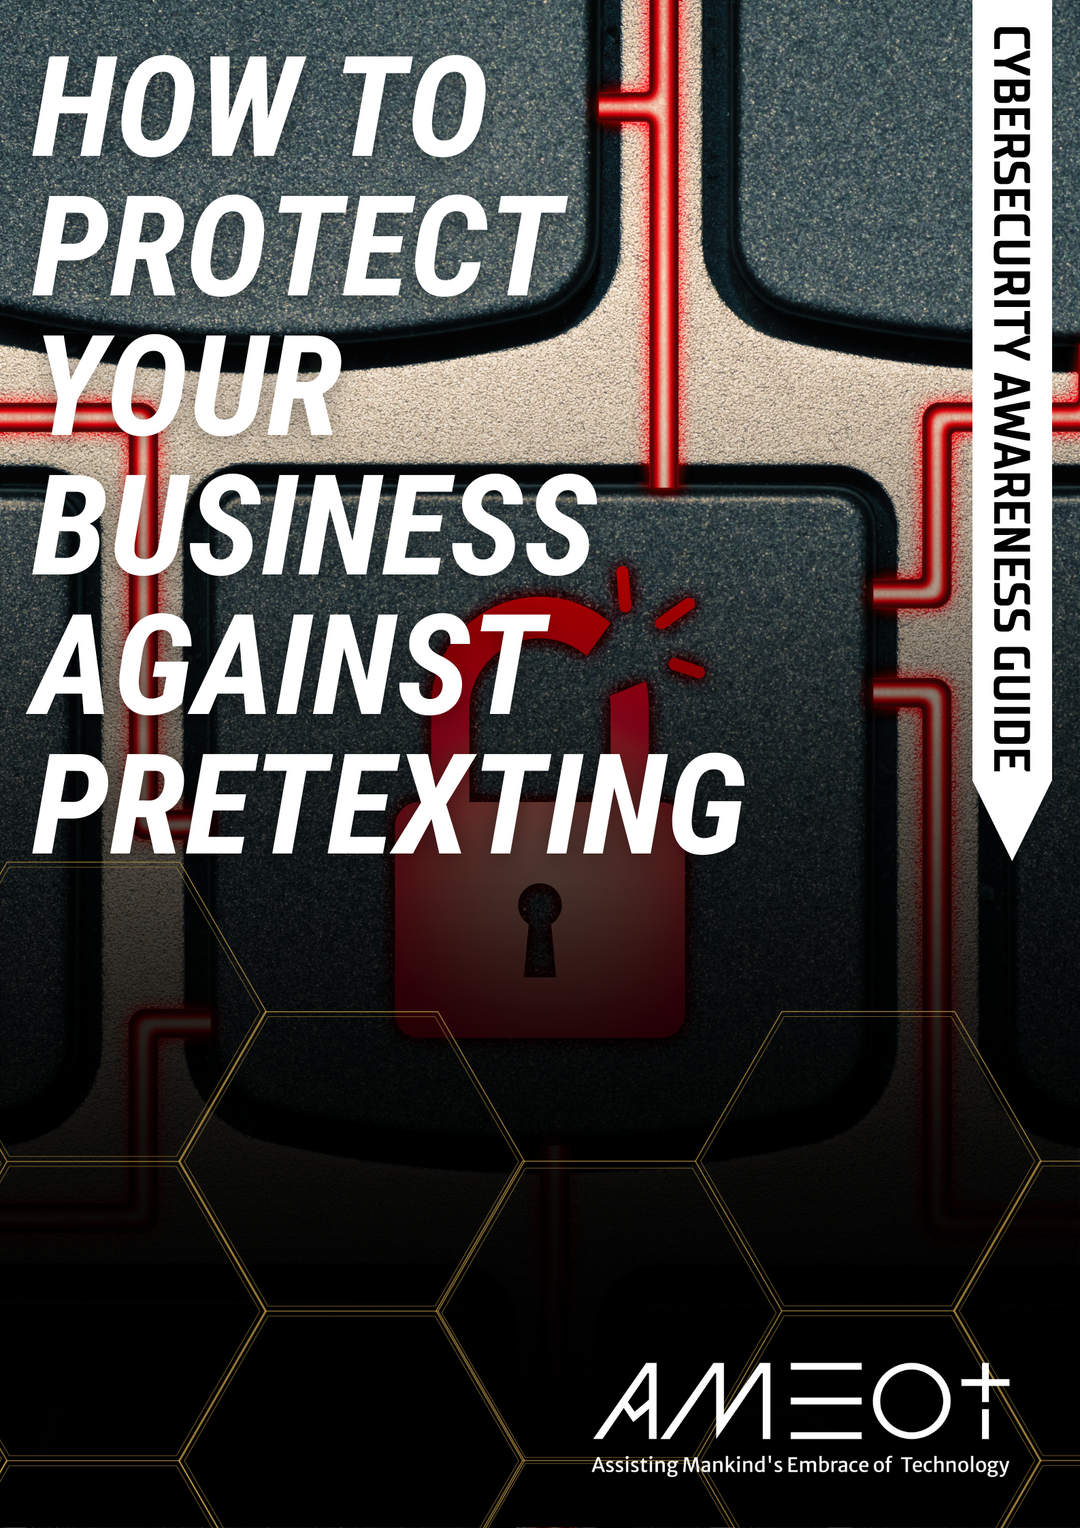 Cyber Awareness Guide: How to prevent Pretexting